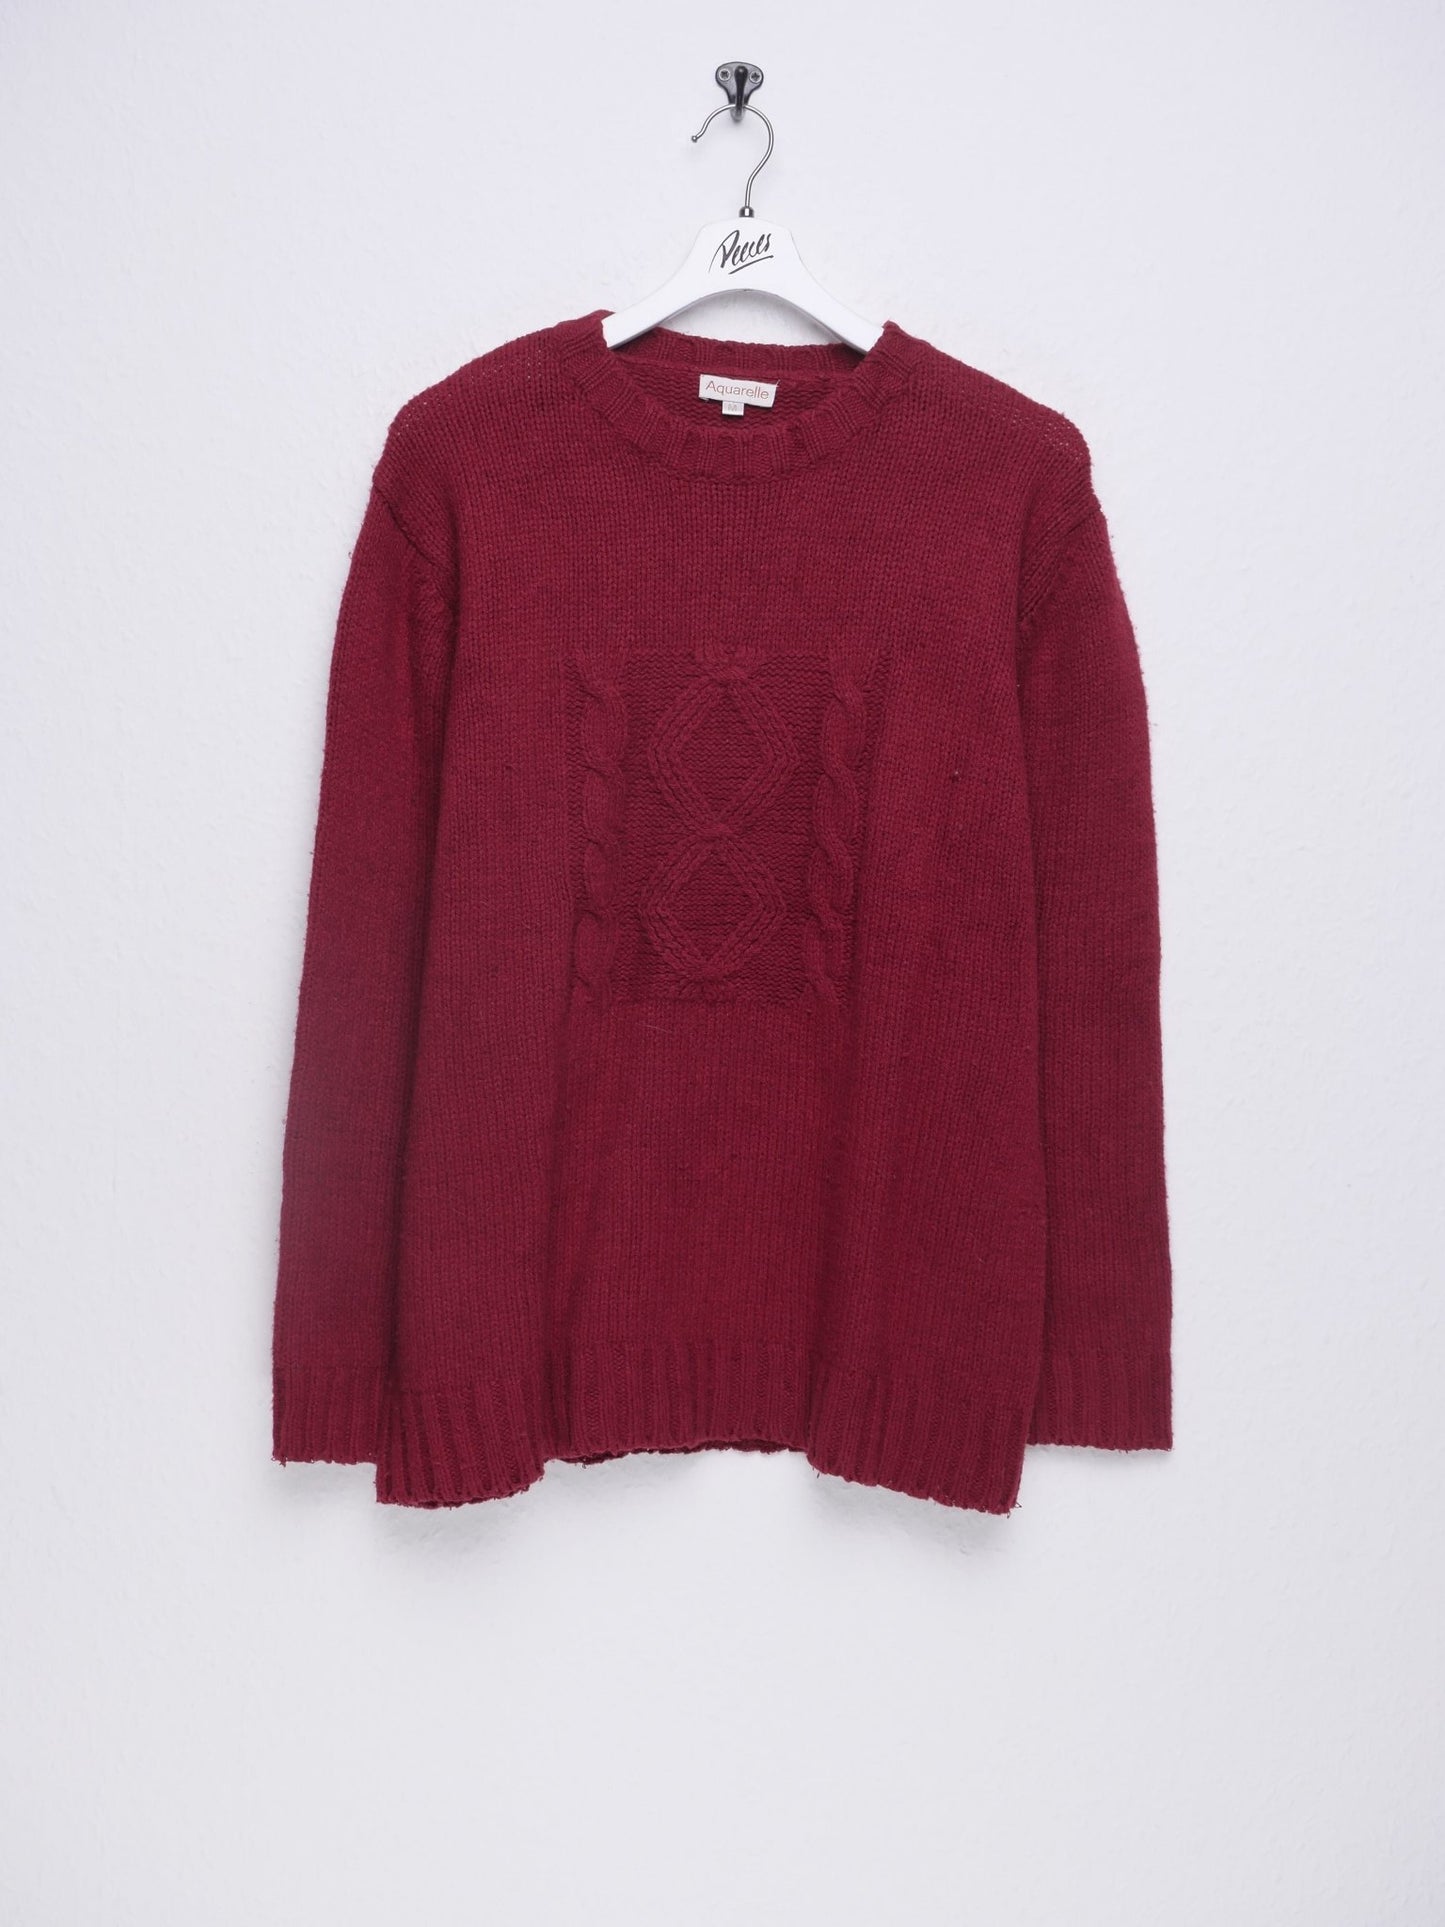 Vintage patterned knit Sweater - Peeces